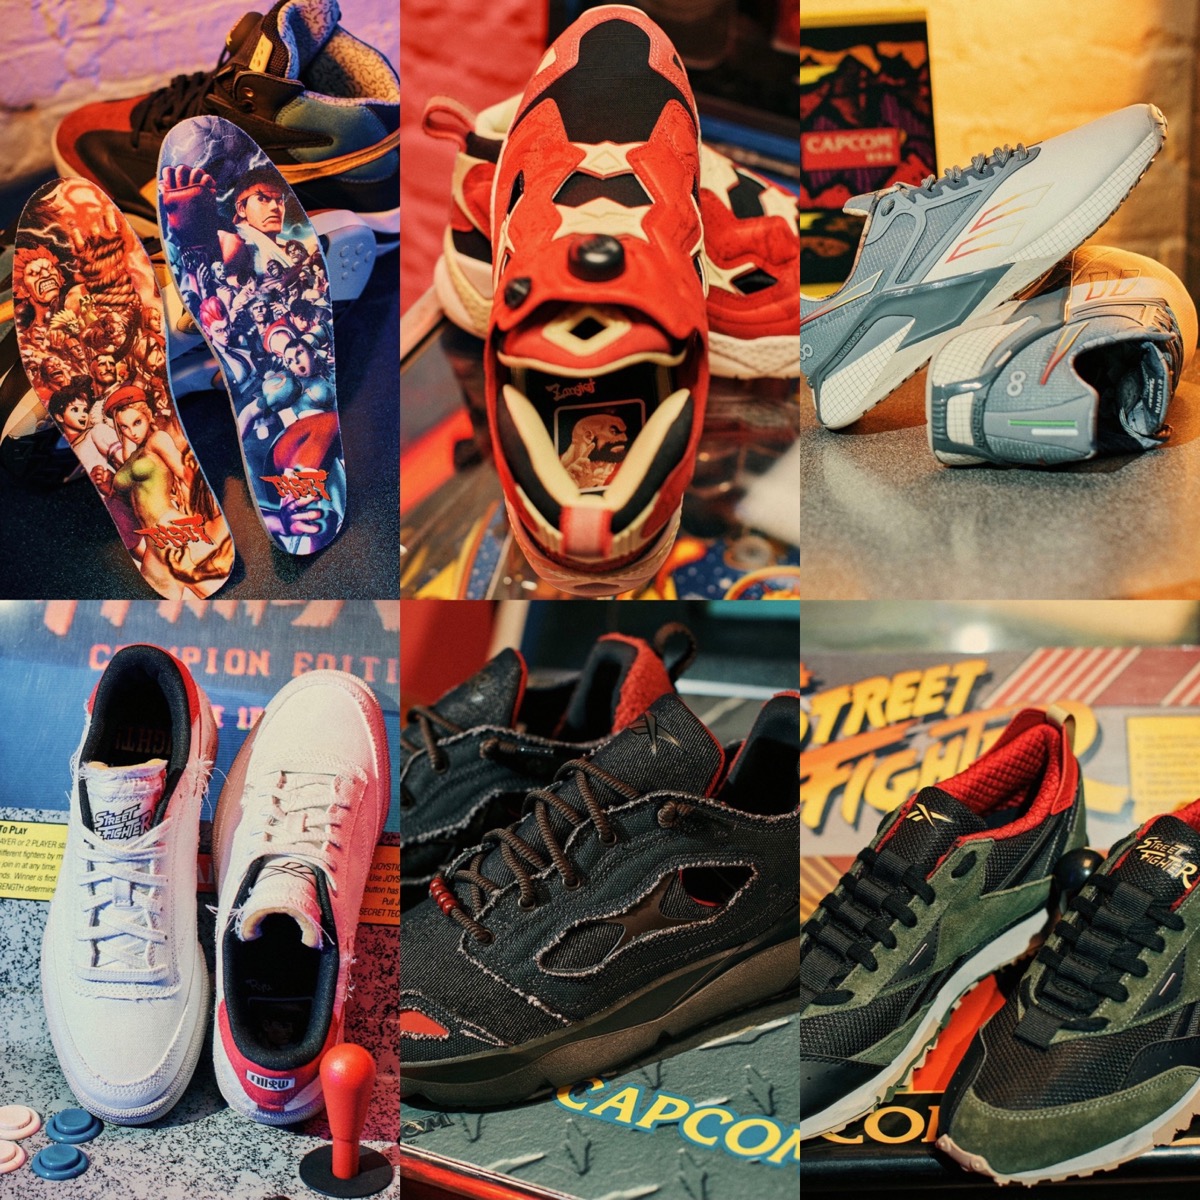 Street Fighter × Reebok “BECOME A CHAMPION” Collectionが国内12月15 ...